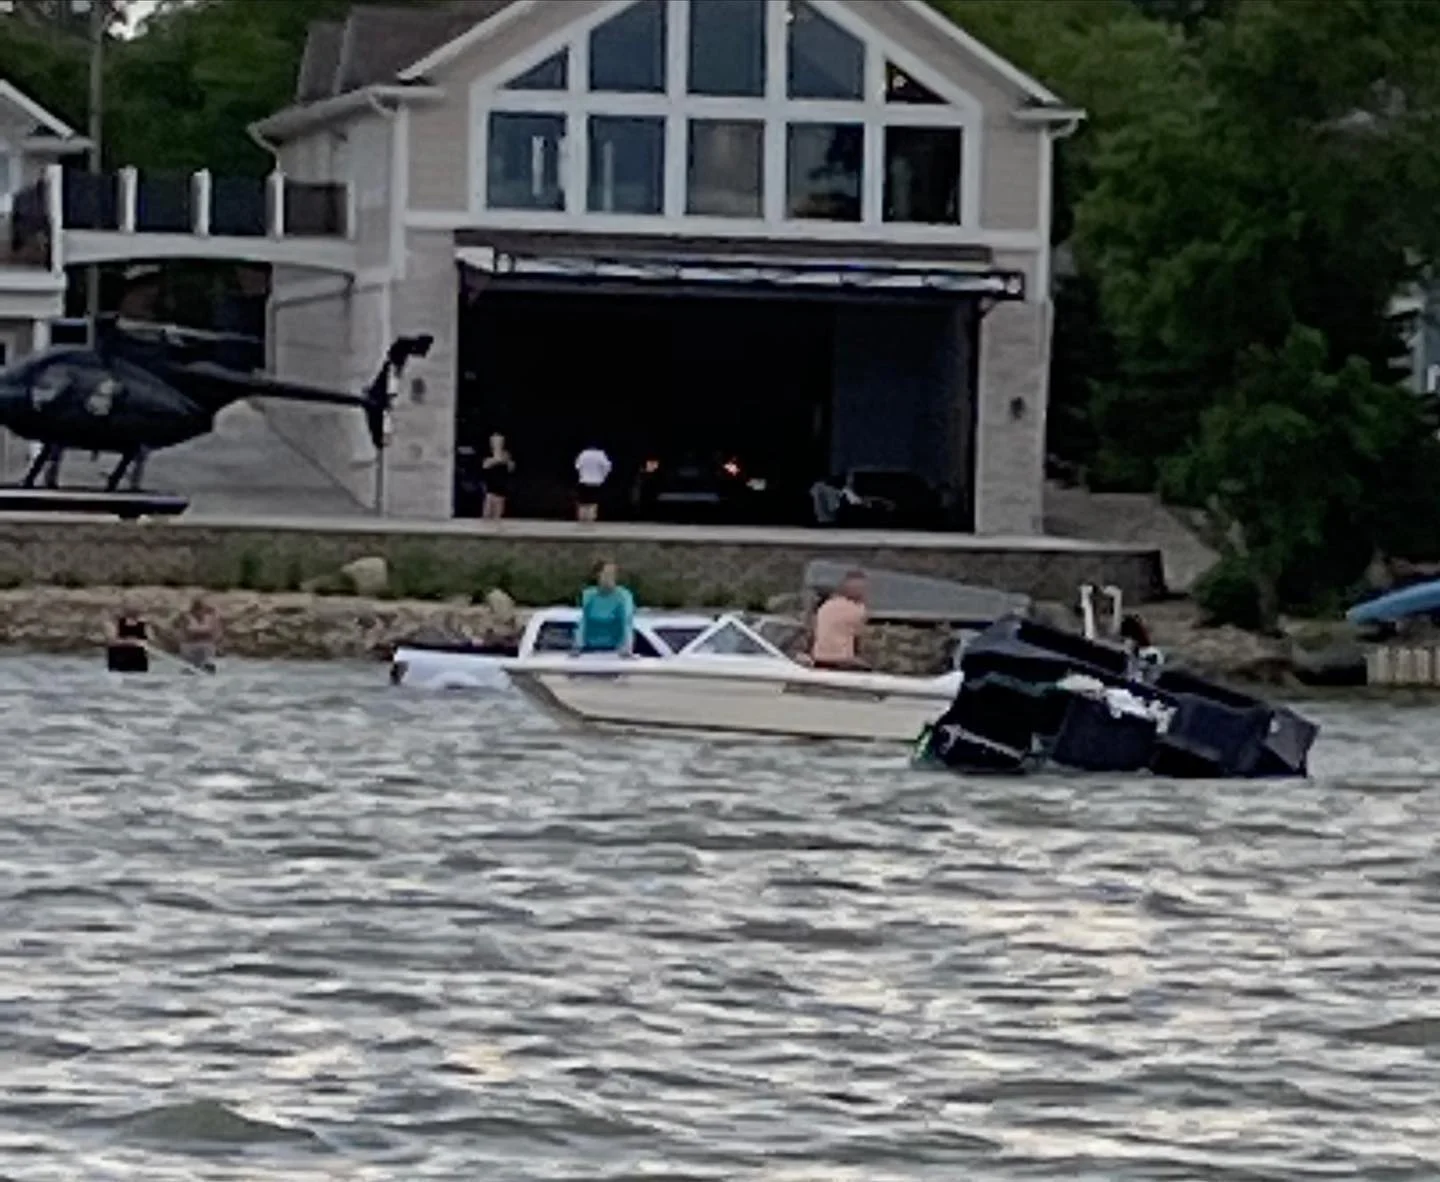 Man Sinks Boat, Then F-150 Raptor    And Wrangler Trying To 